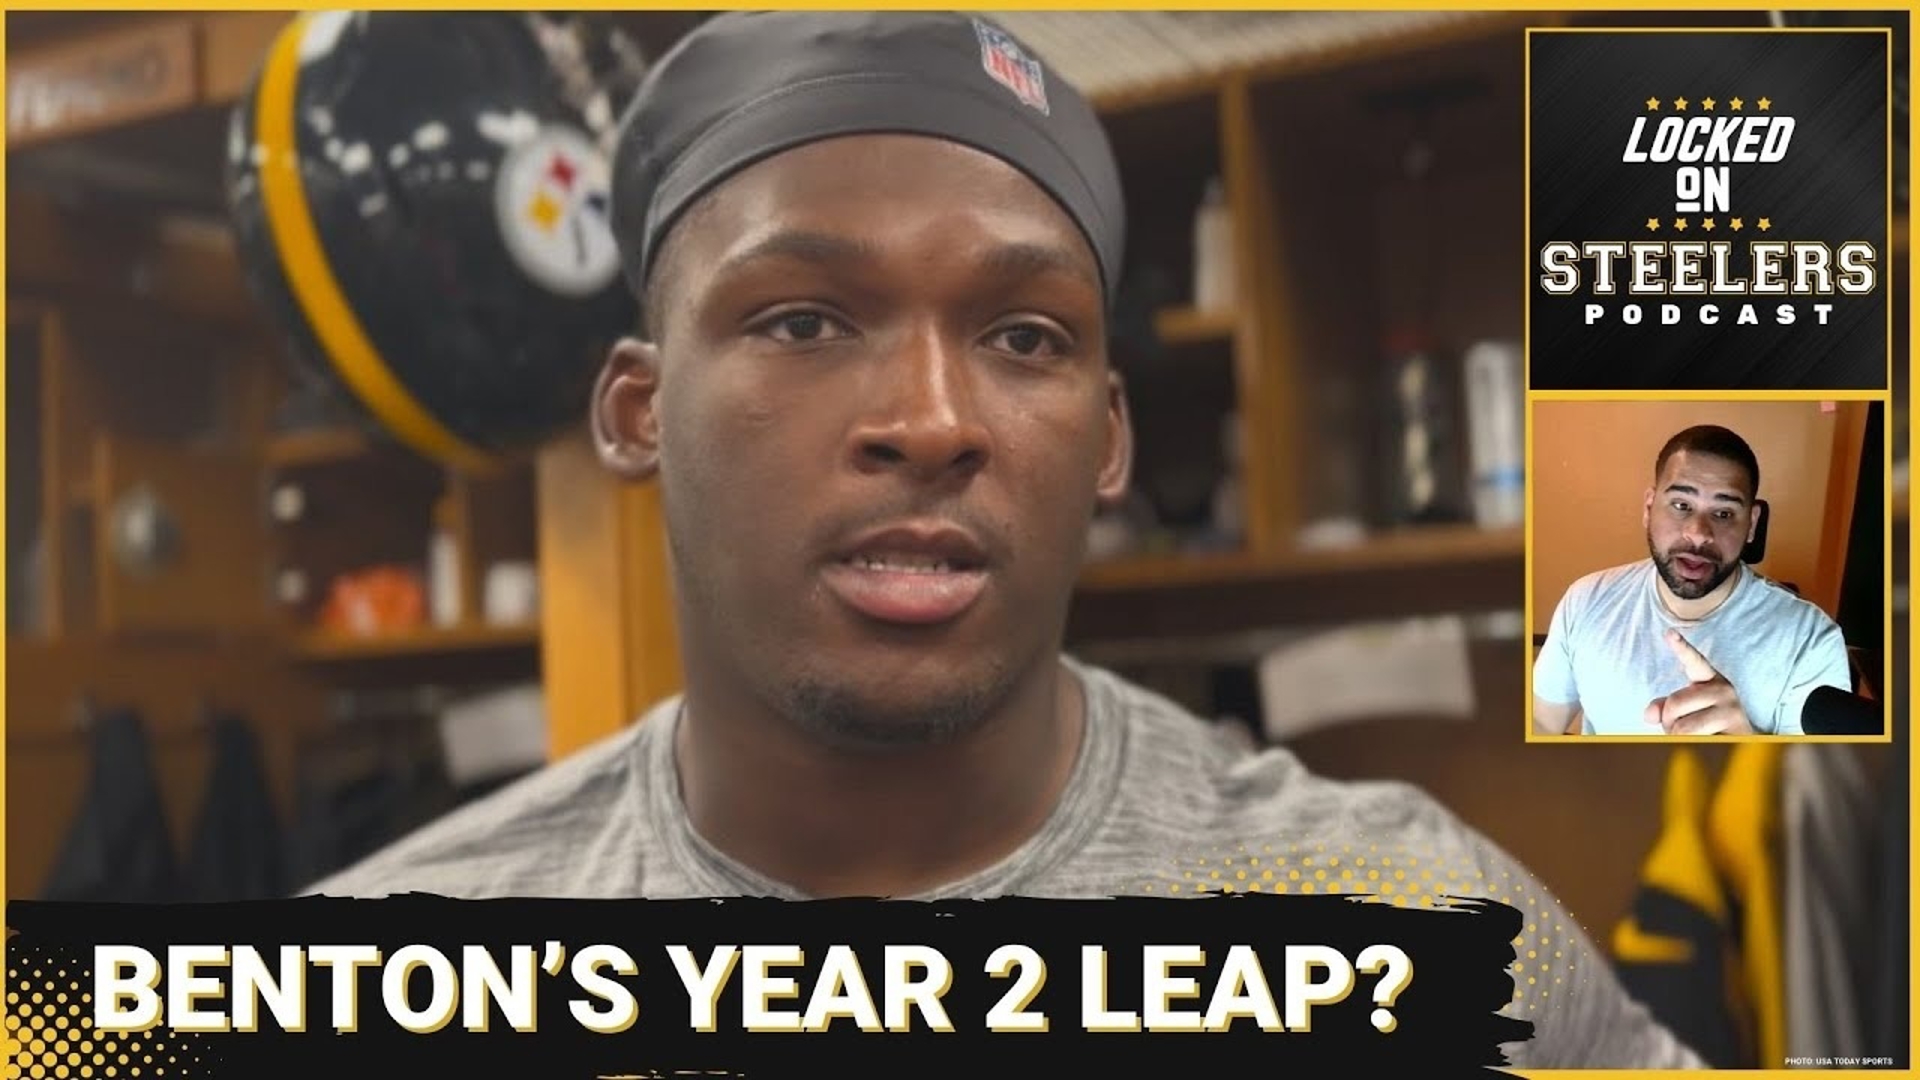 The Pittsburgh Steelers need Keeanu Benton to step up in year 2 of his career, but is he ready?